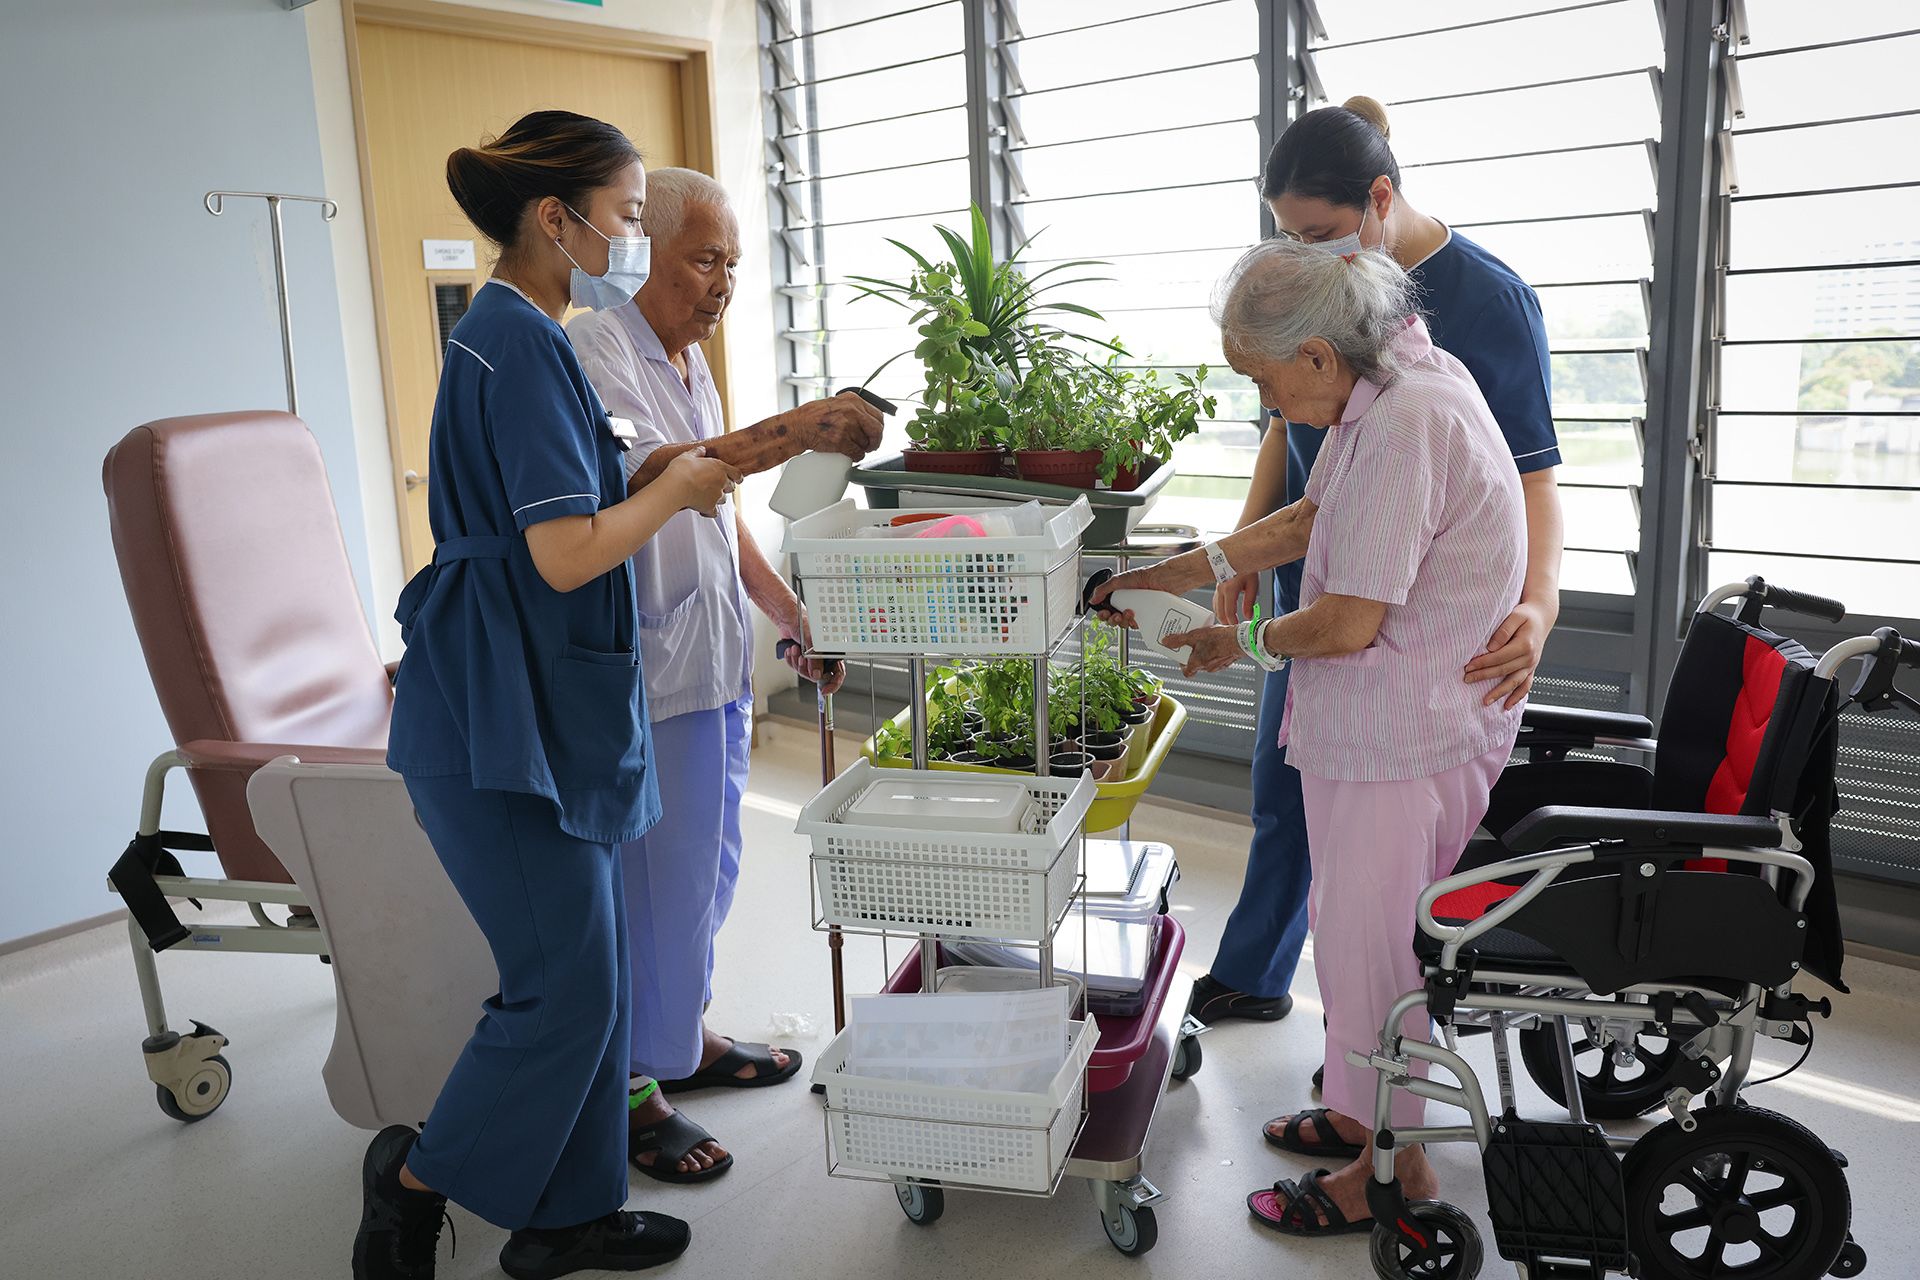 Senior staff nurses Dian Azrinda (extreme left) and Gwen Huw (extreme right) assist patients Haji Saad and Pua Hor Lee in standing and watering plants. Encouraging patients to stand helps improve their physical condition.